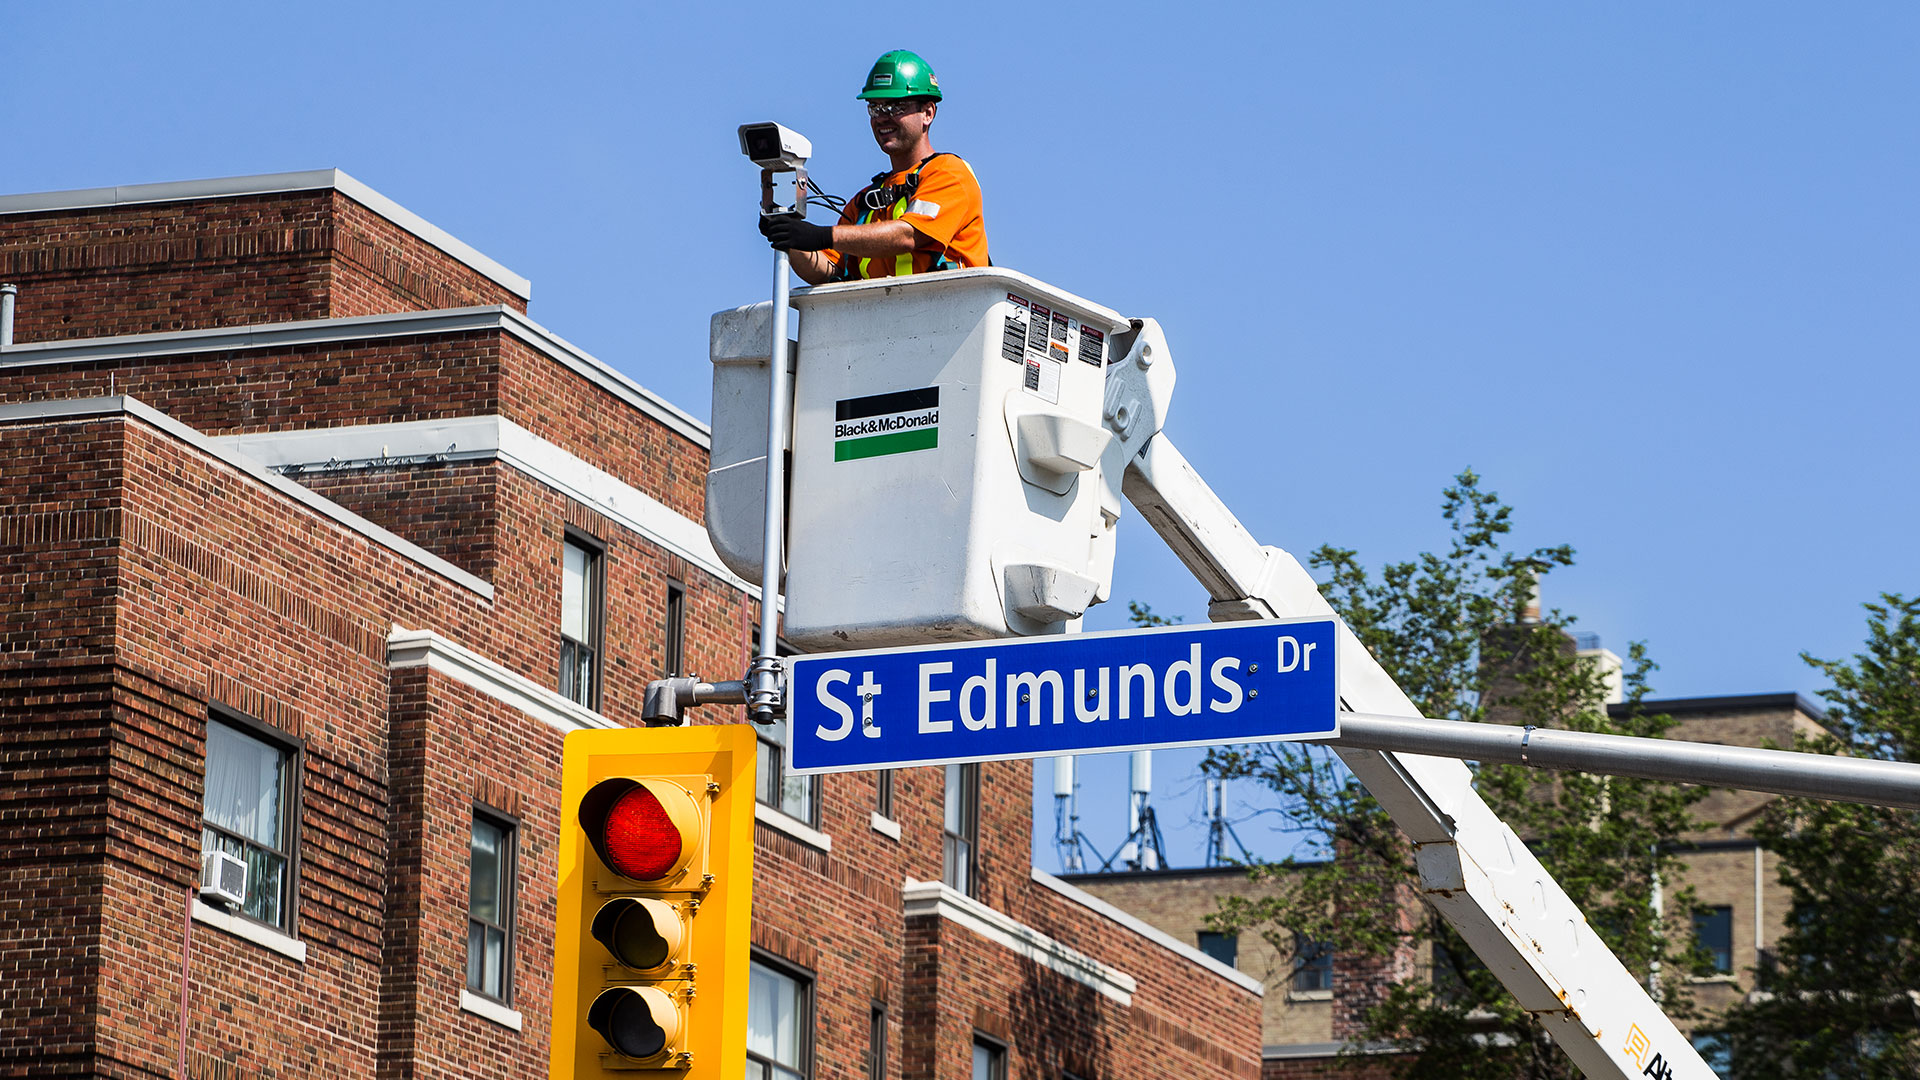 B&M service technician installing intelligent traffic management system at an intersection